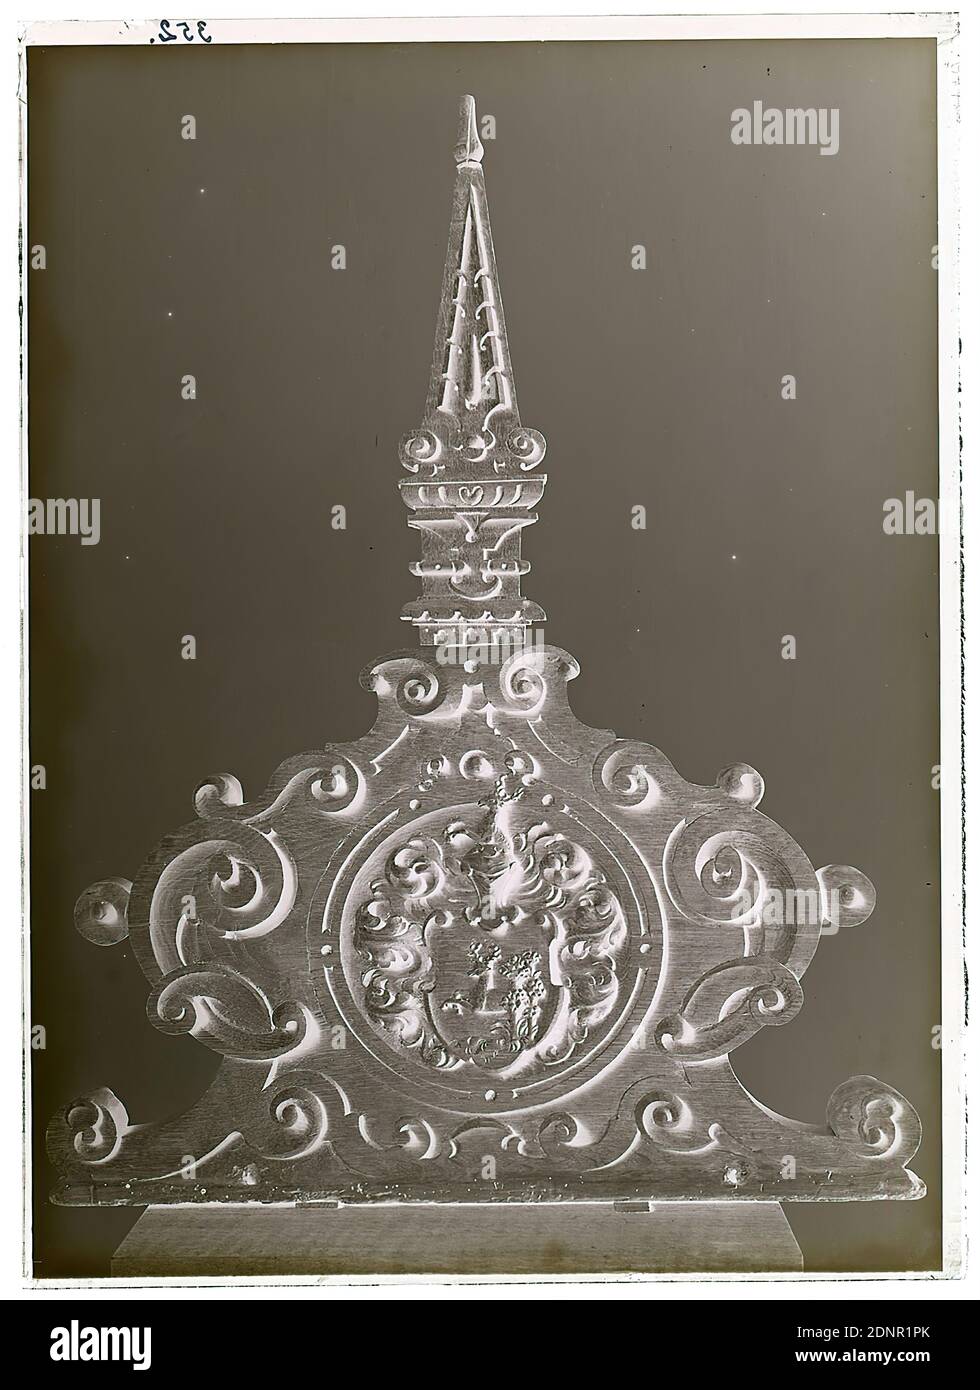 Wilhelm Weimar, glass negative, black and white negative process, total: height: 23,8 cm; width: 17,8 cm, numbered: top left: in black ink: 352, handicraft, arts and crafts, industrial design, work of applied arts (wood, z. e.g. panelling), ornaments, heraldic shield, heraldic symbol, helmet, heraldic animals, deer, sculpture, plastic, sculpture art. As a trained engraver and graduate of the School of Arts and Crafts Stock Photo